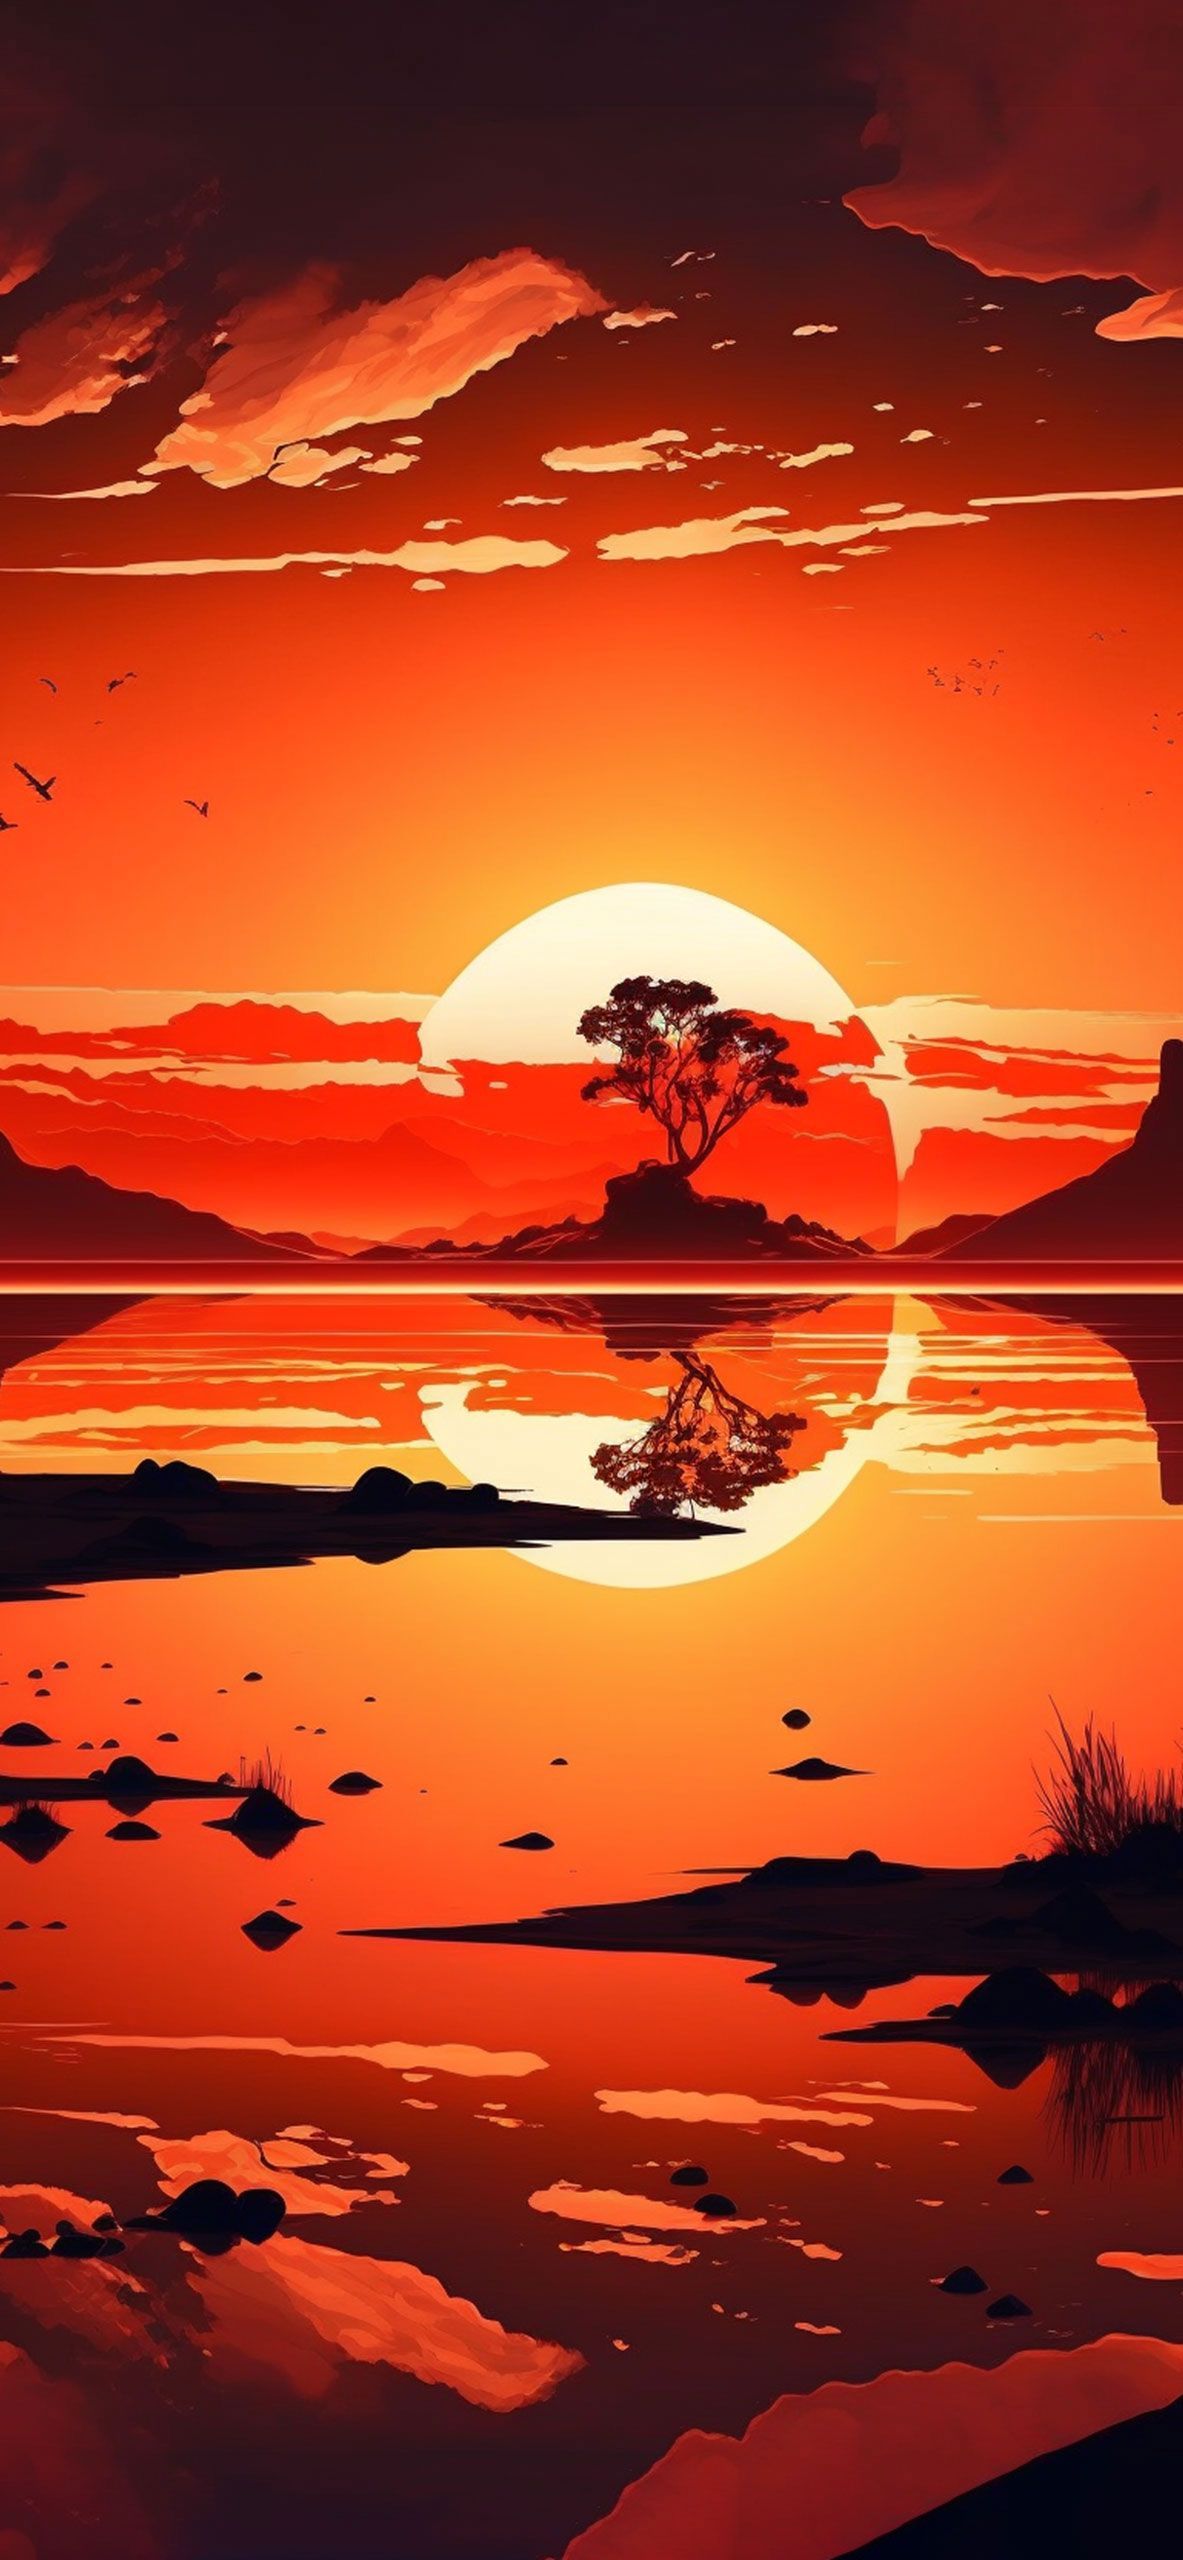 A sunset scene with mountains and water - Orange, sunset